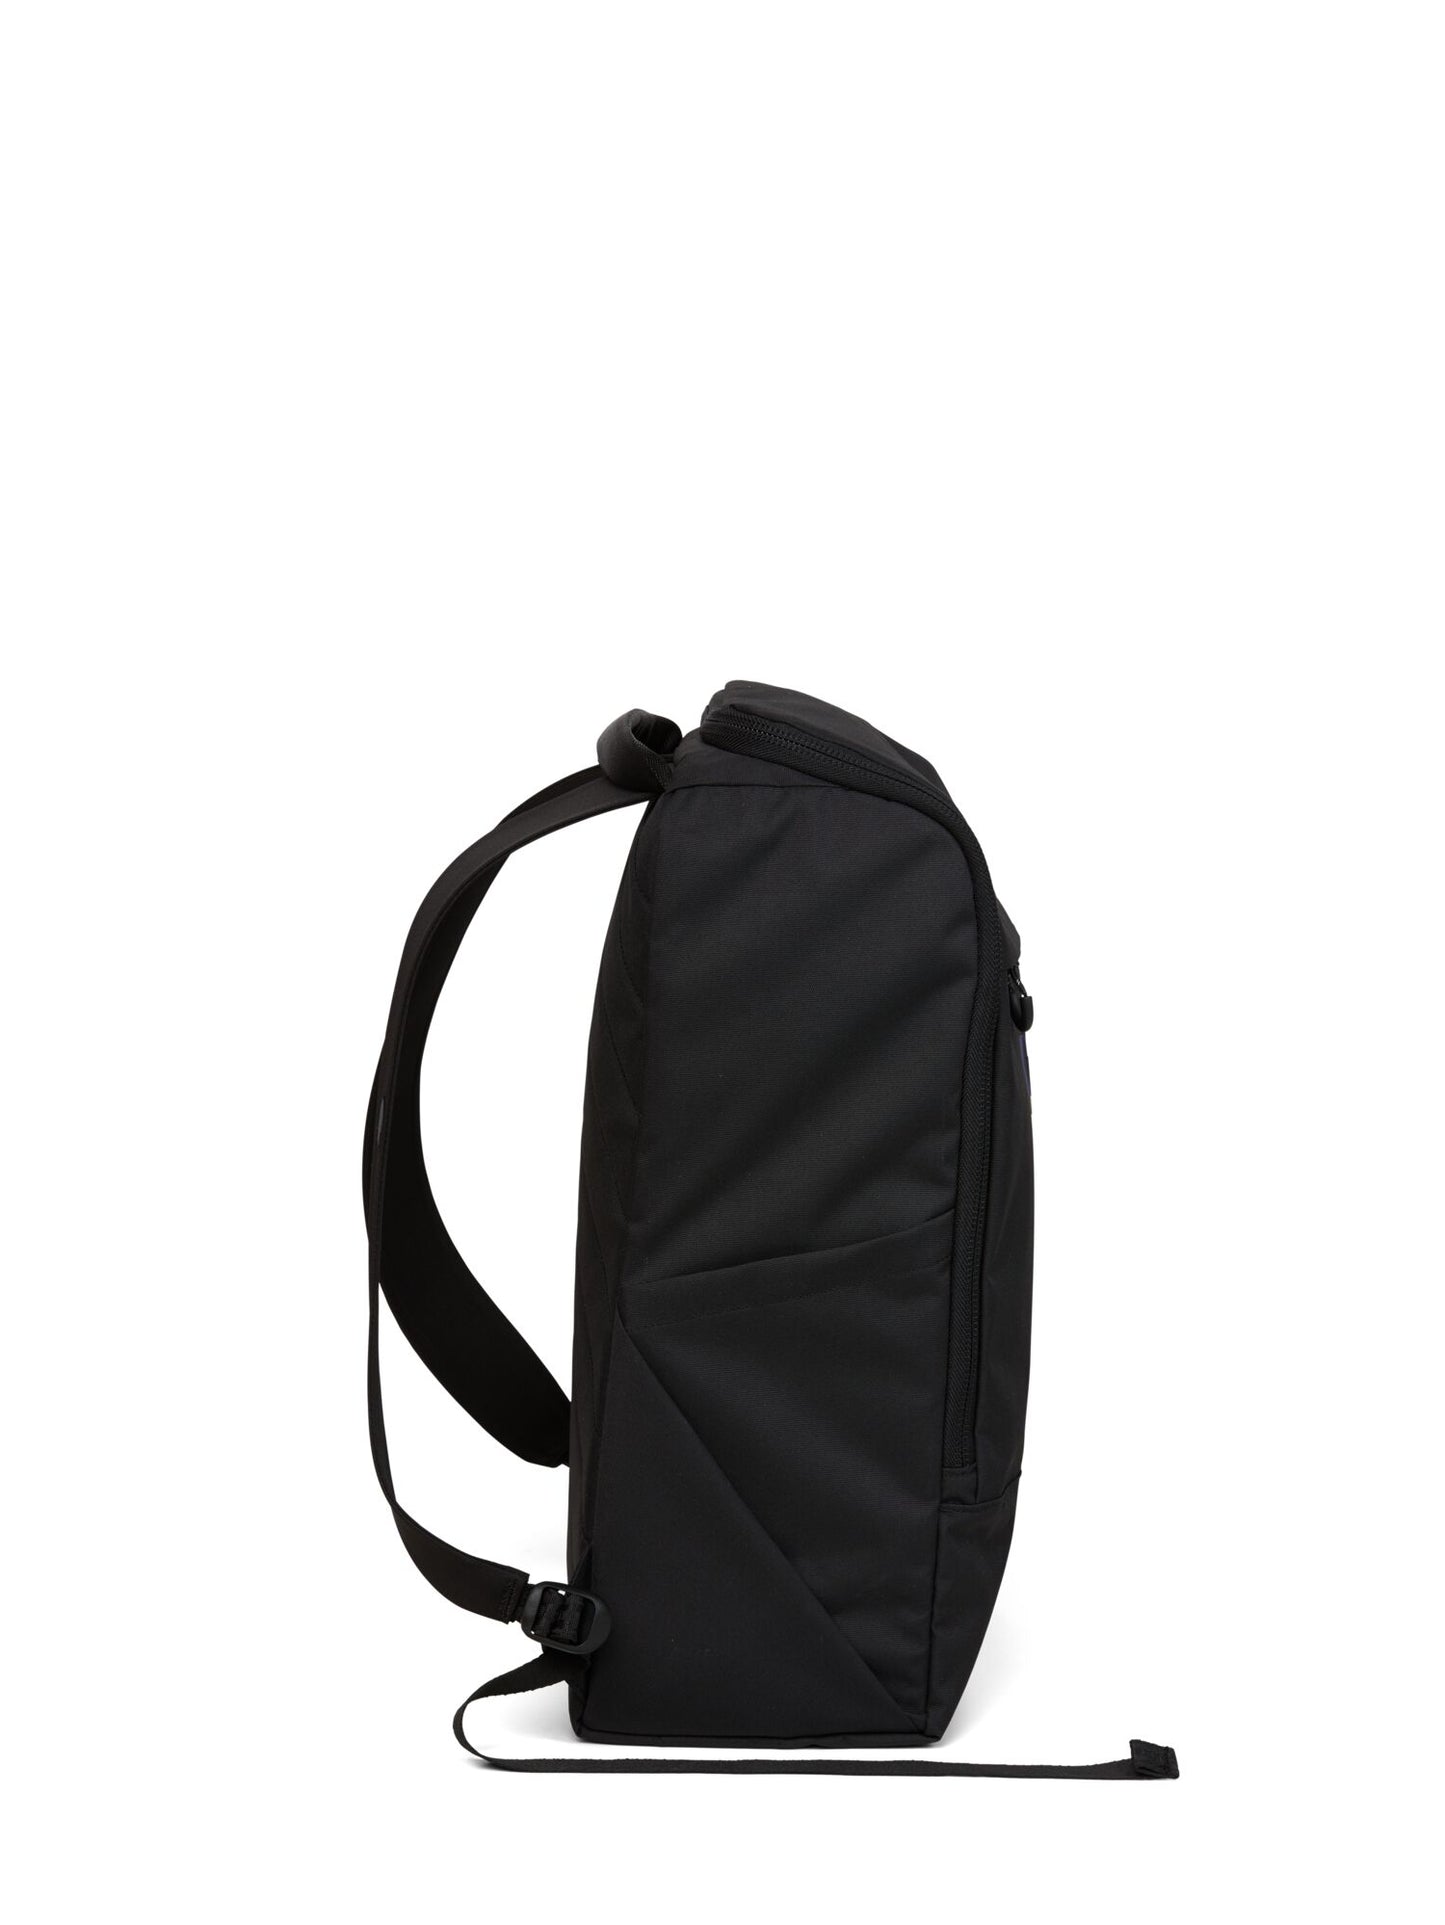 pinqponq-backpack-purik-rooted-black-side